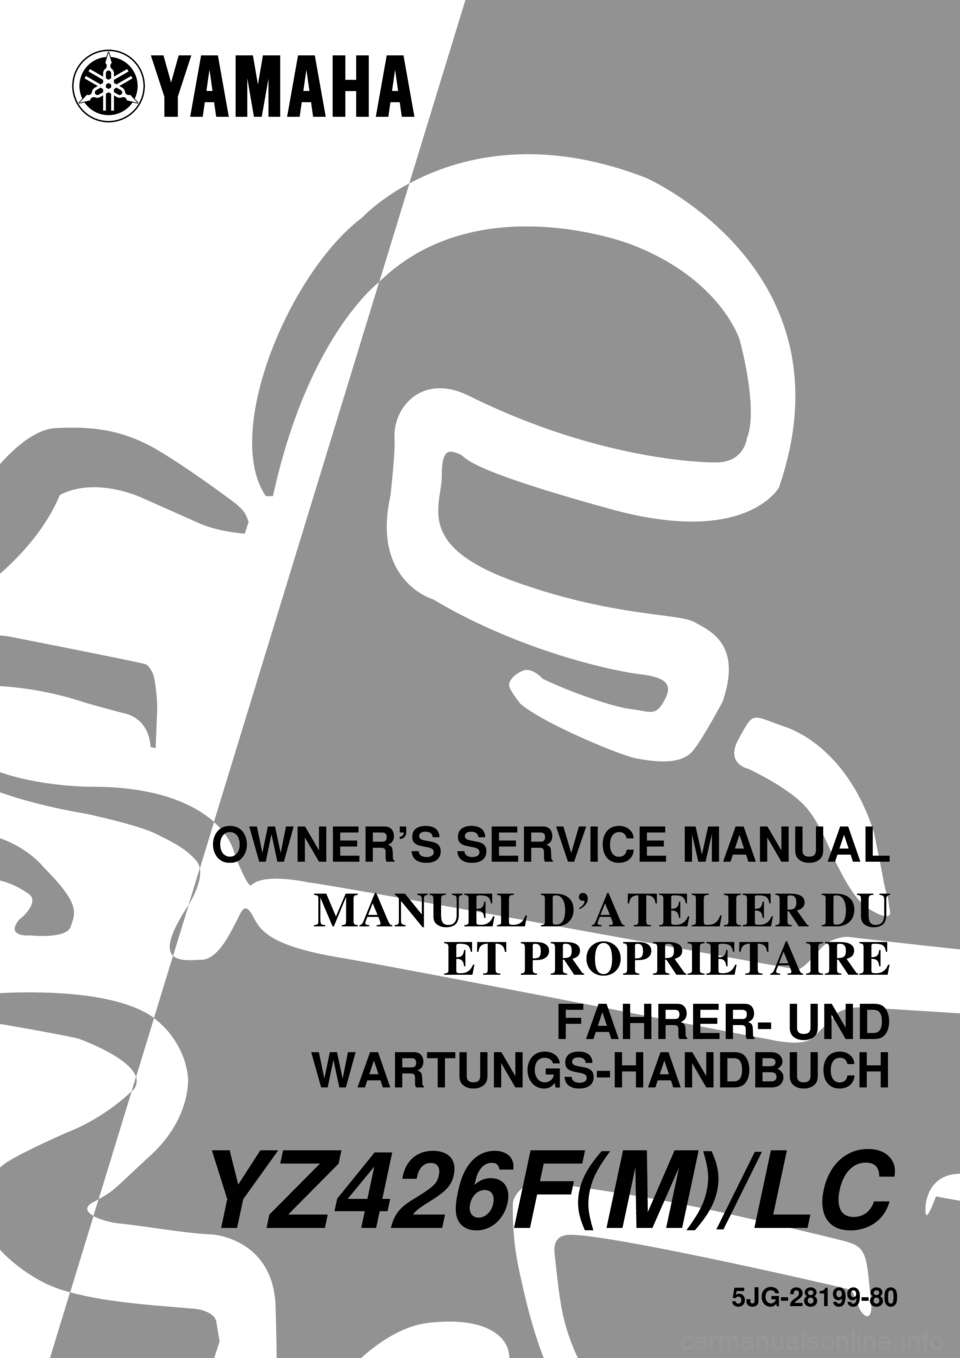 YAMAHA YZ426F 2000  Notices Demploi (in French) 5JG-28199-80
YZ426F(M)/LC
OWNER’S SERVICE MANUAL
MANUEL D’ATELIER DU
ET PROPRIETAIRE
FAHRER- UND
WARTUNGS-HANDBUCH 